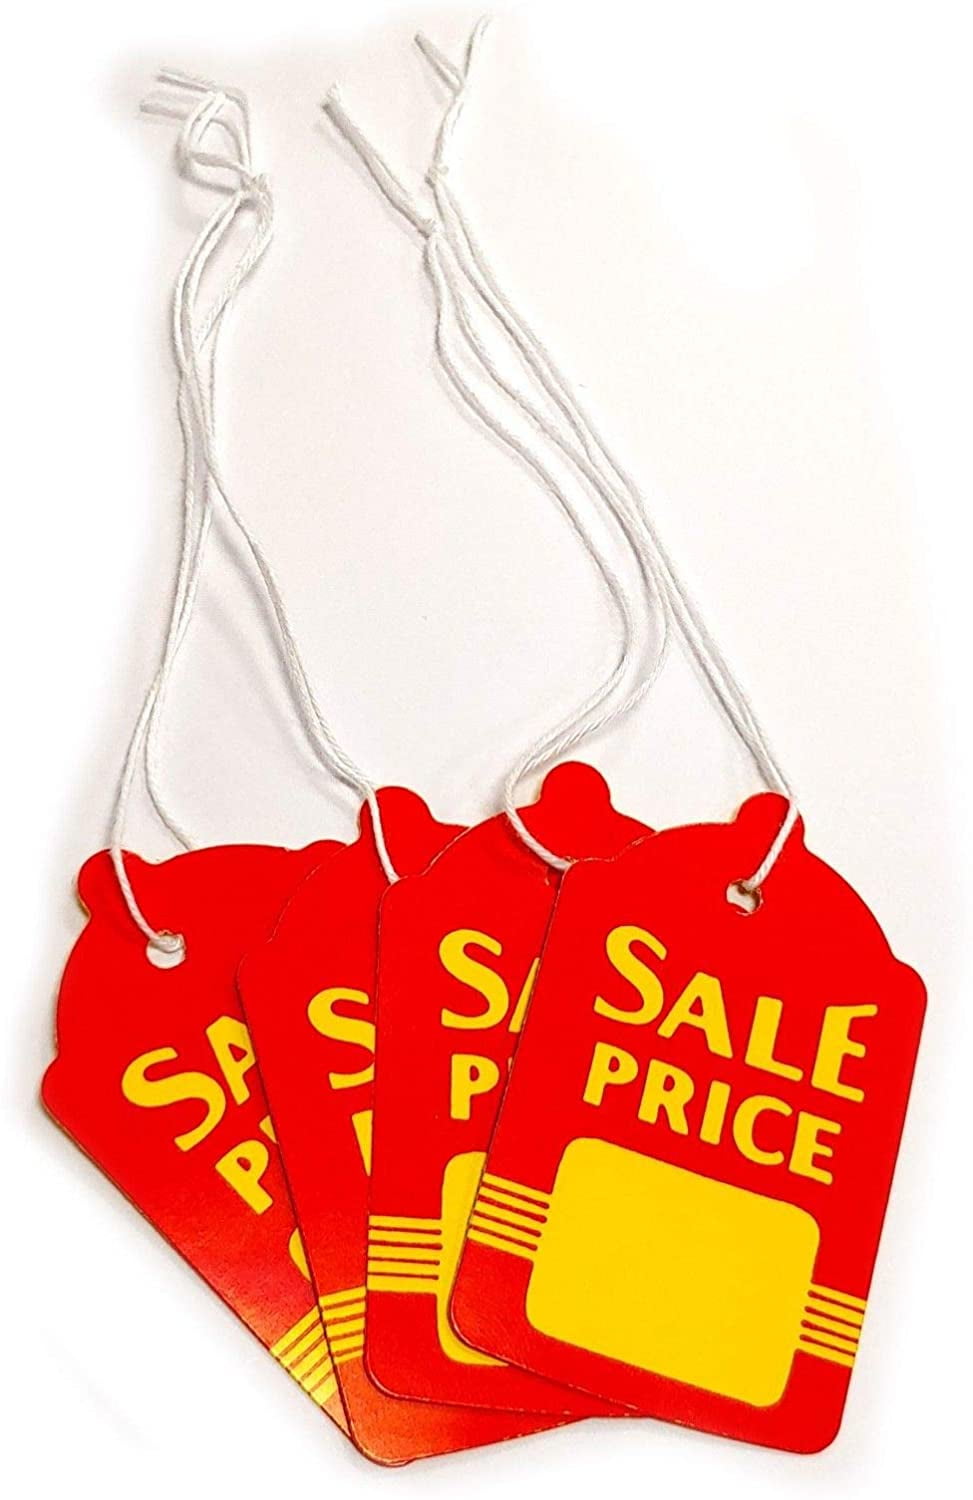 1.6" W x 2.7" H Wholesale Large Red & Yellow Strung Boutique Sale Price Tags 